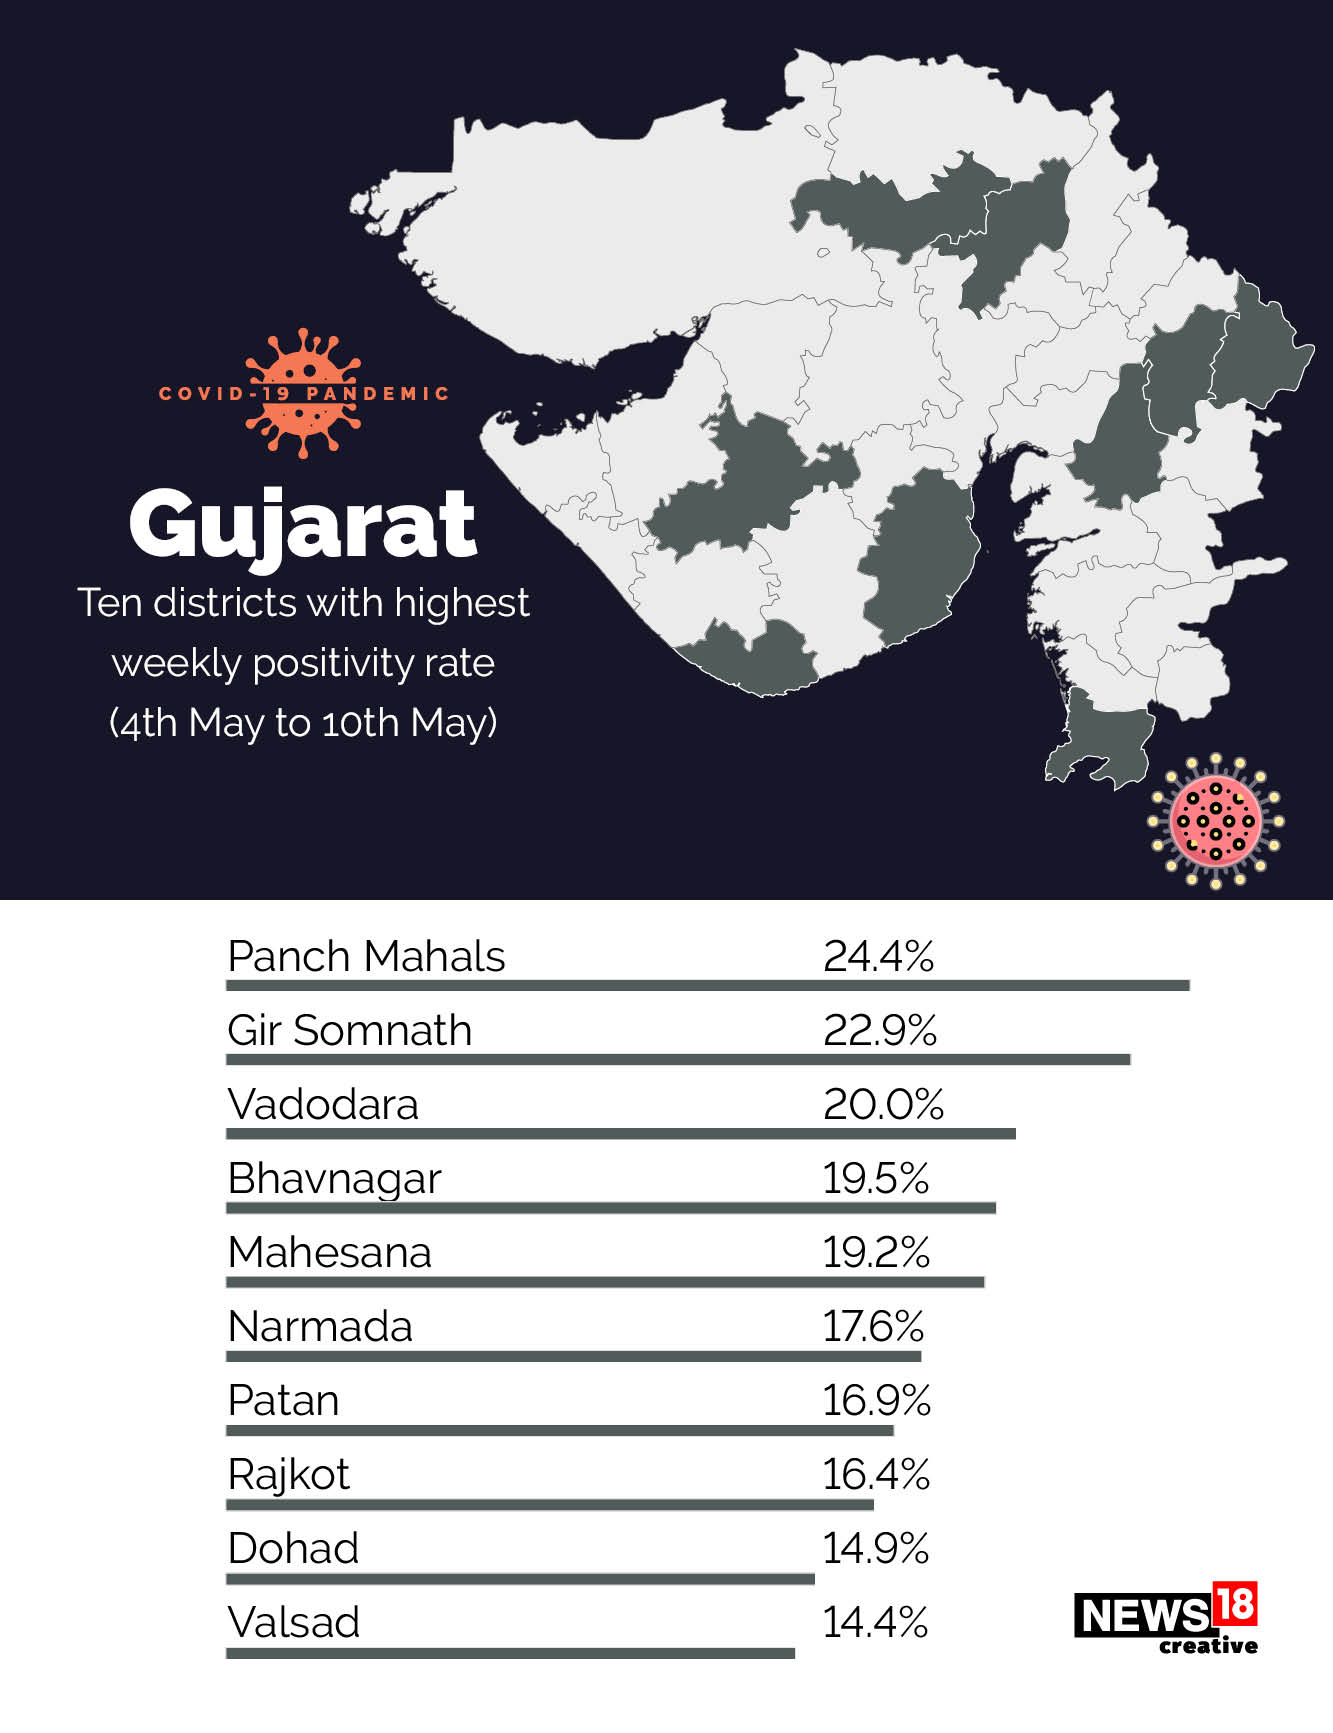 Covid-19 shifts to rural India: 533 of India's 700 districts report over 10% positivity rate